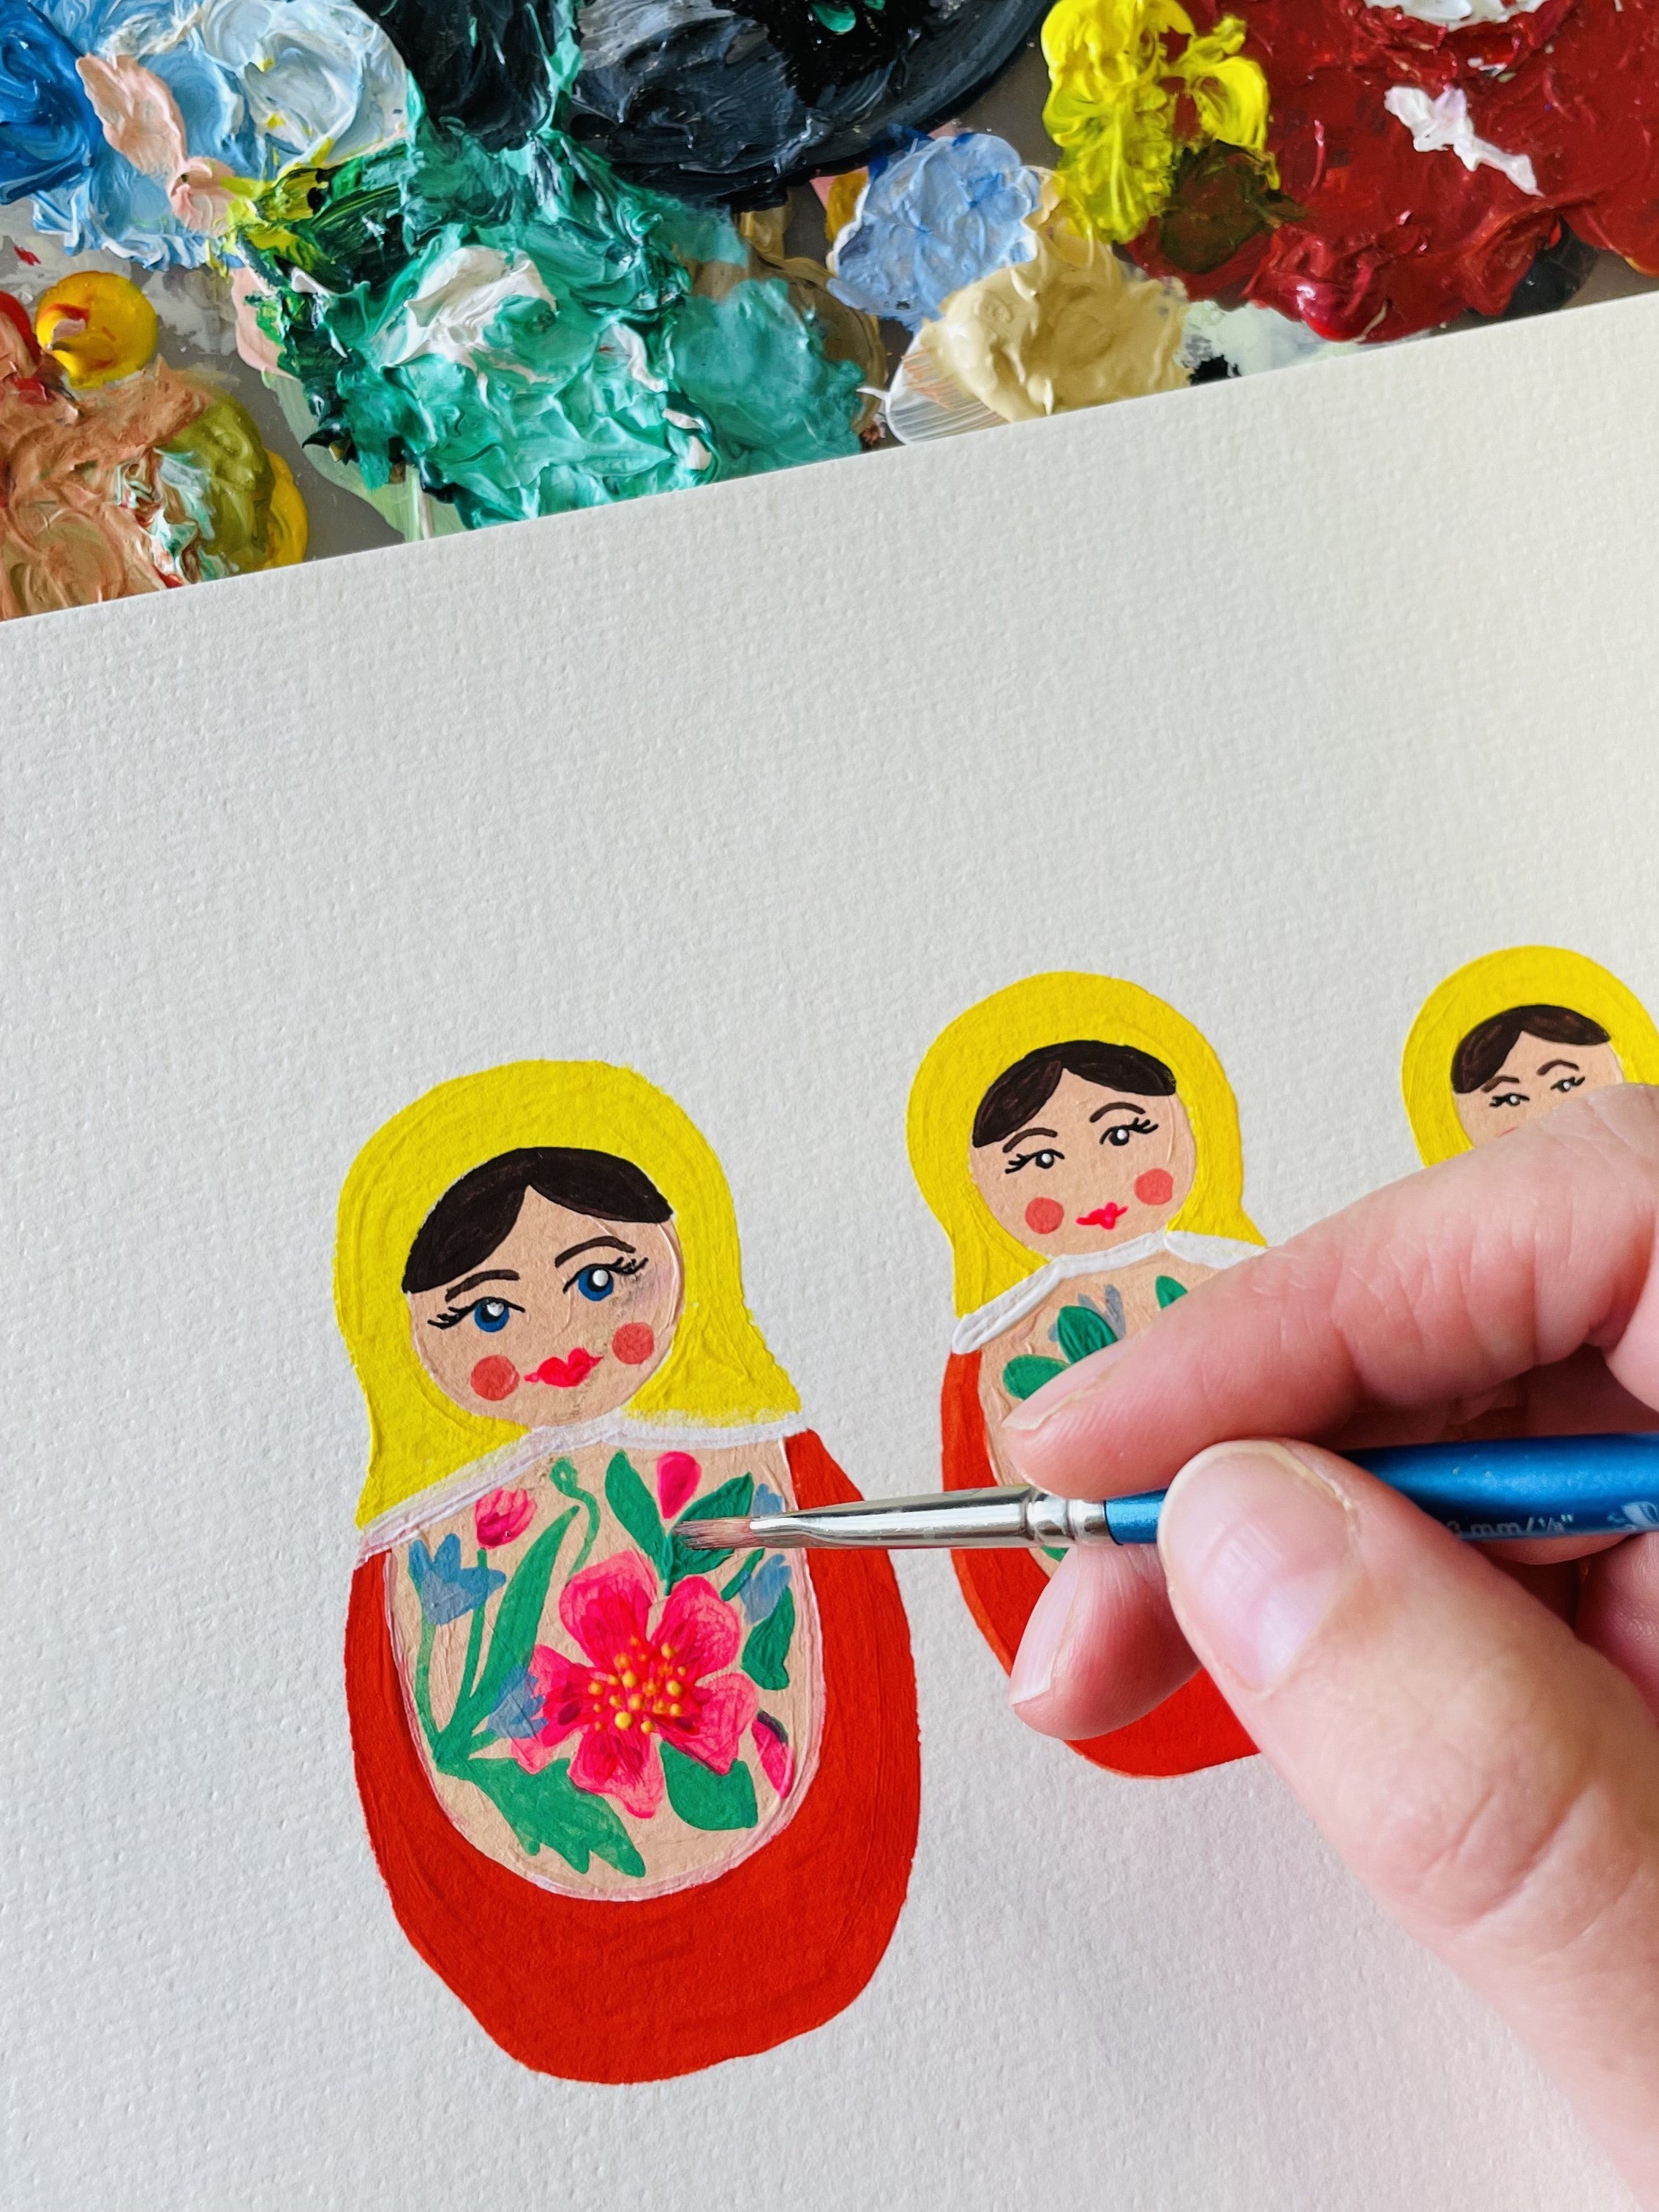 an image of an original russian doll painting